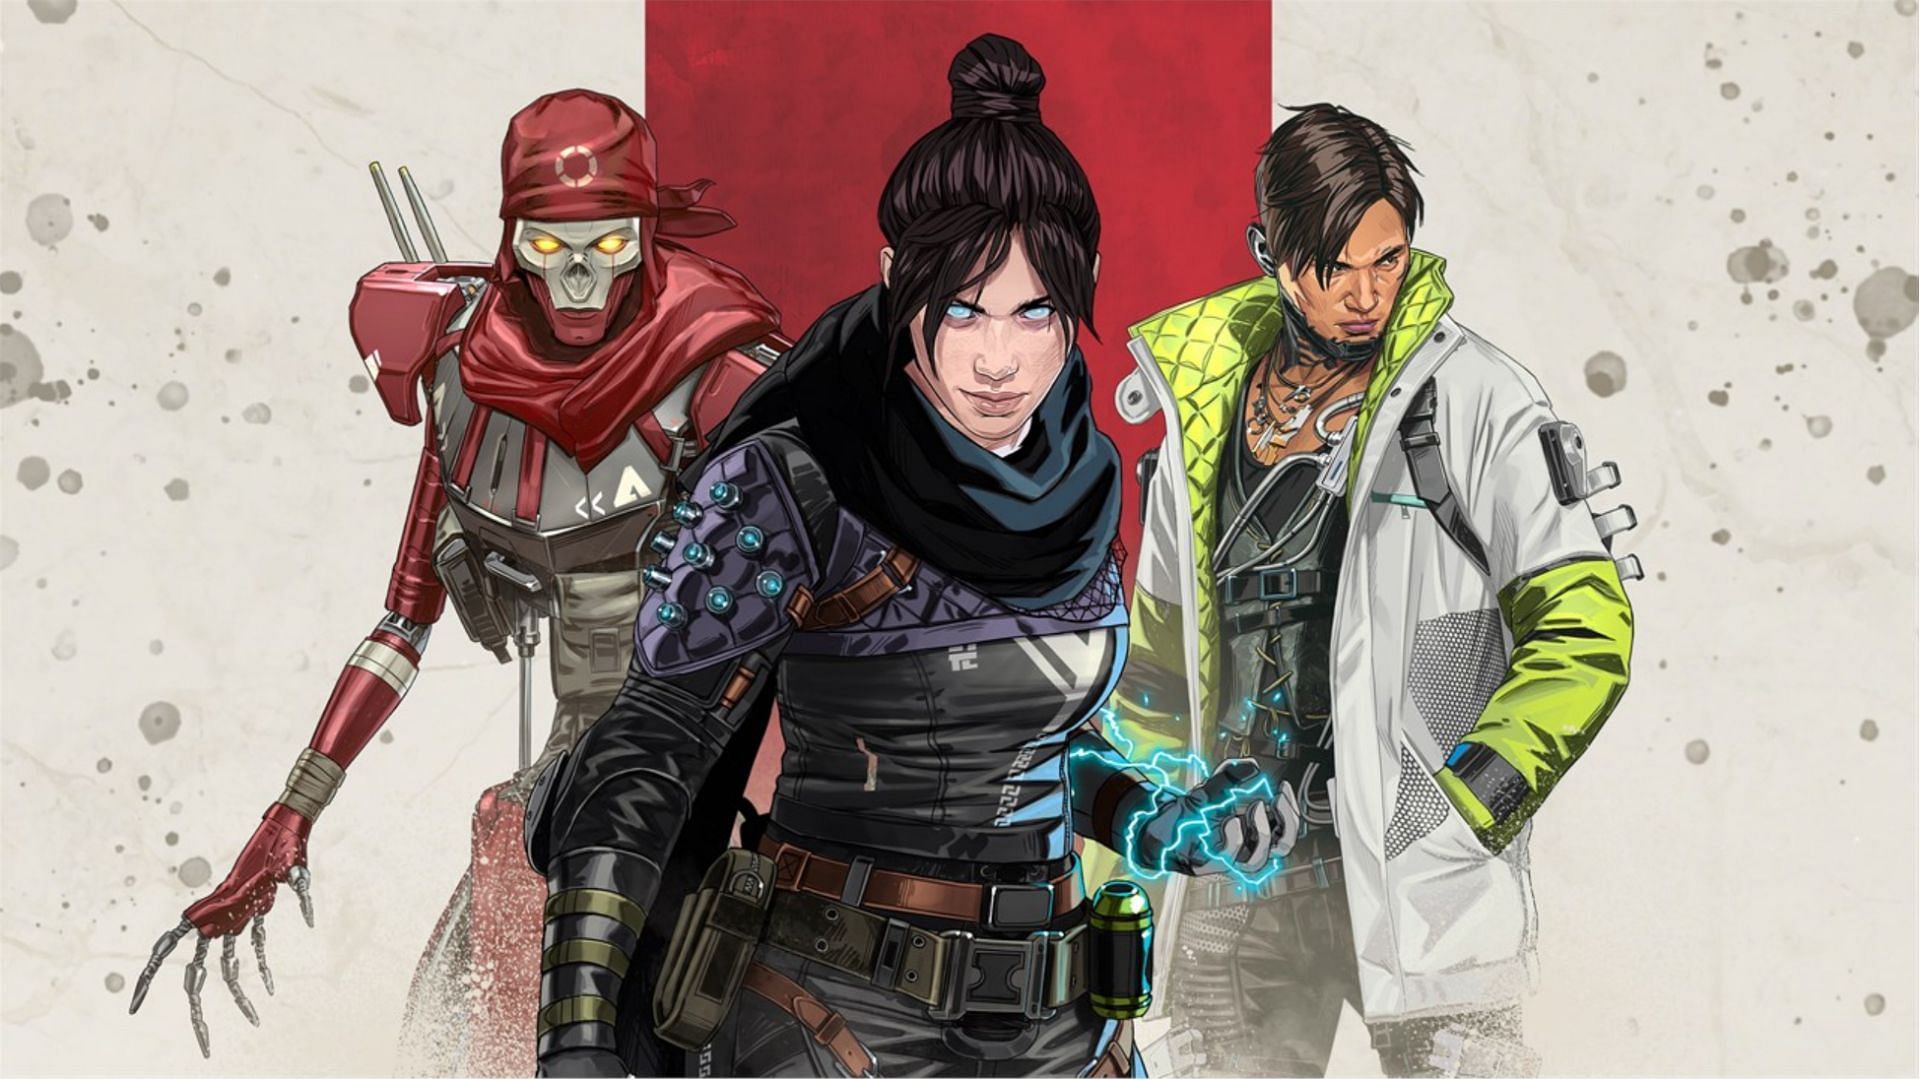 Apex Legends players want the issues of the game to be fixed (Image via Respawn)